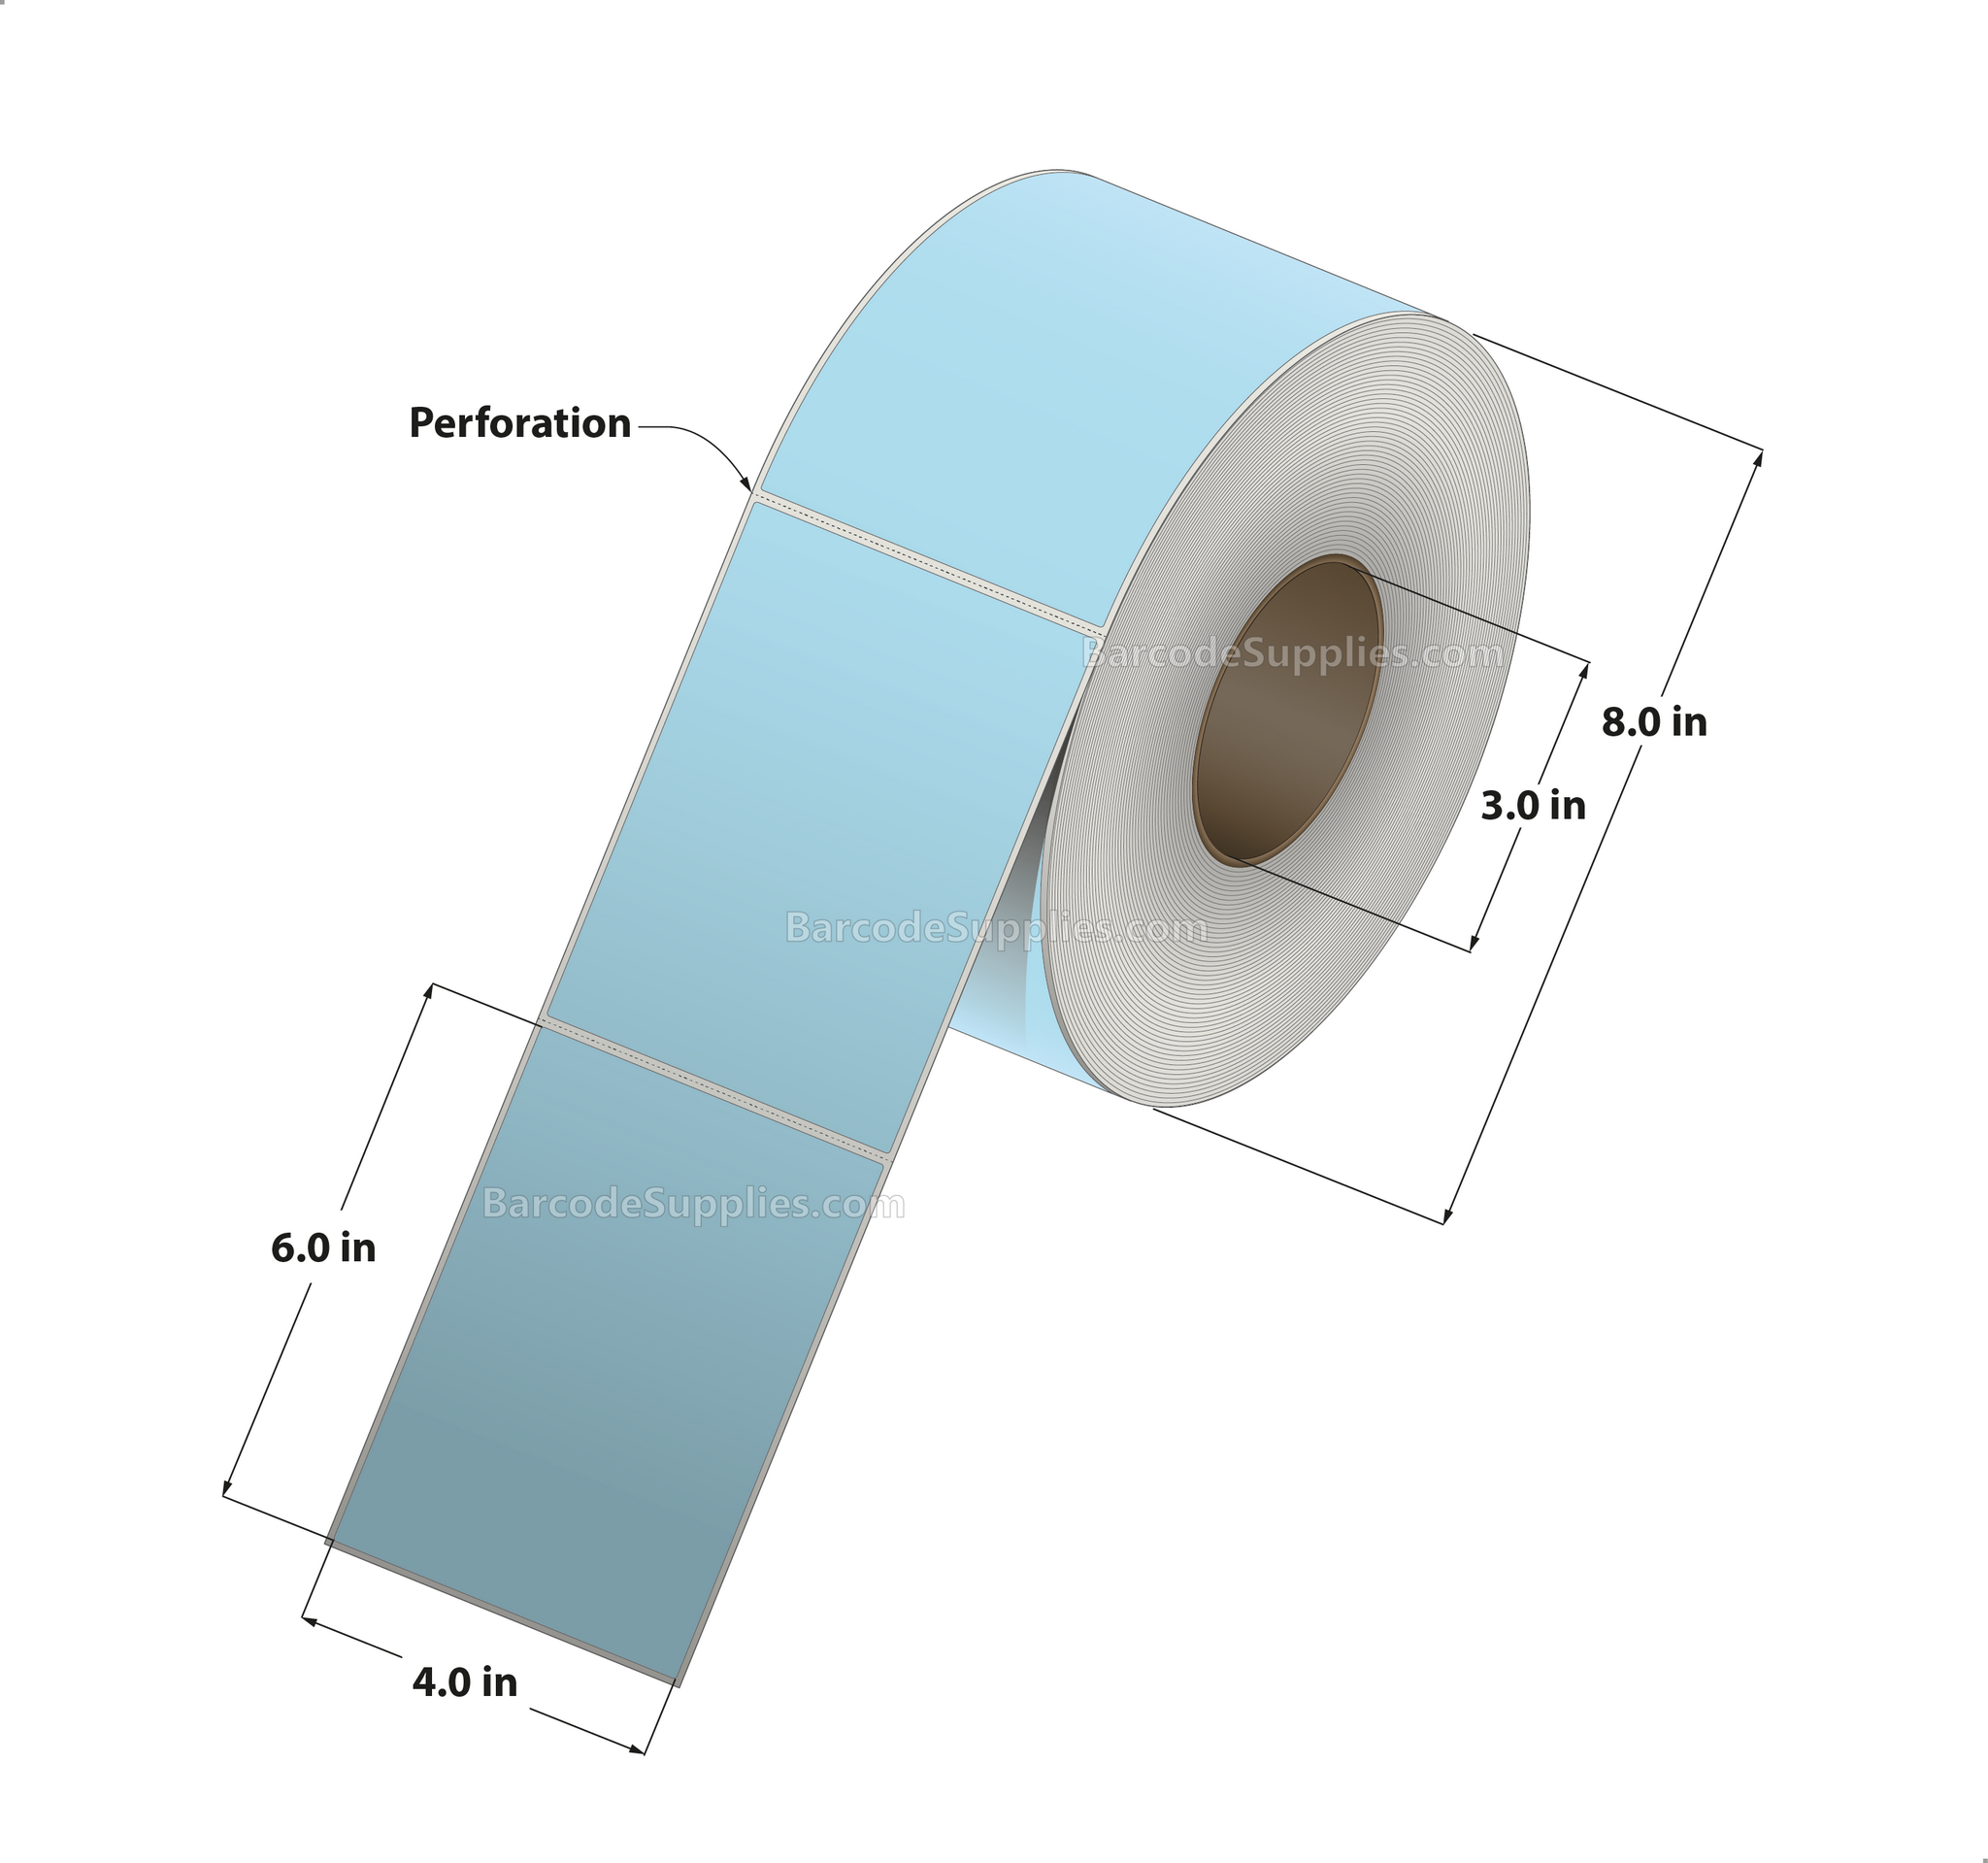 4 x 6 Thermal Transfer 290 Blue Labels With Permanent Adhesive - Perforated - 1000 Labels Per Roll - Carton Of 4 Rolls - 4000 Labels Total - MPN: RFC-4-6-1000-BL